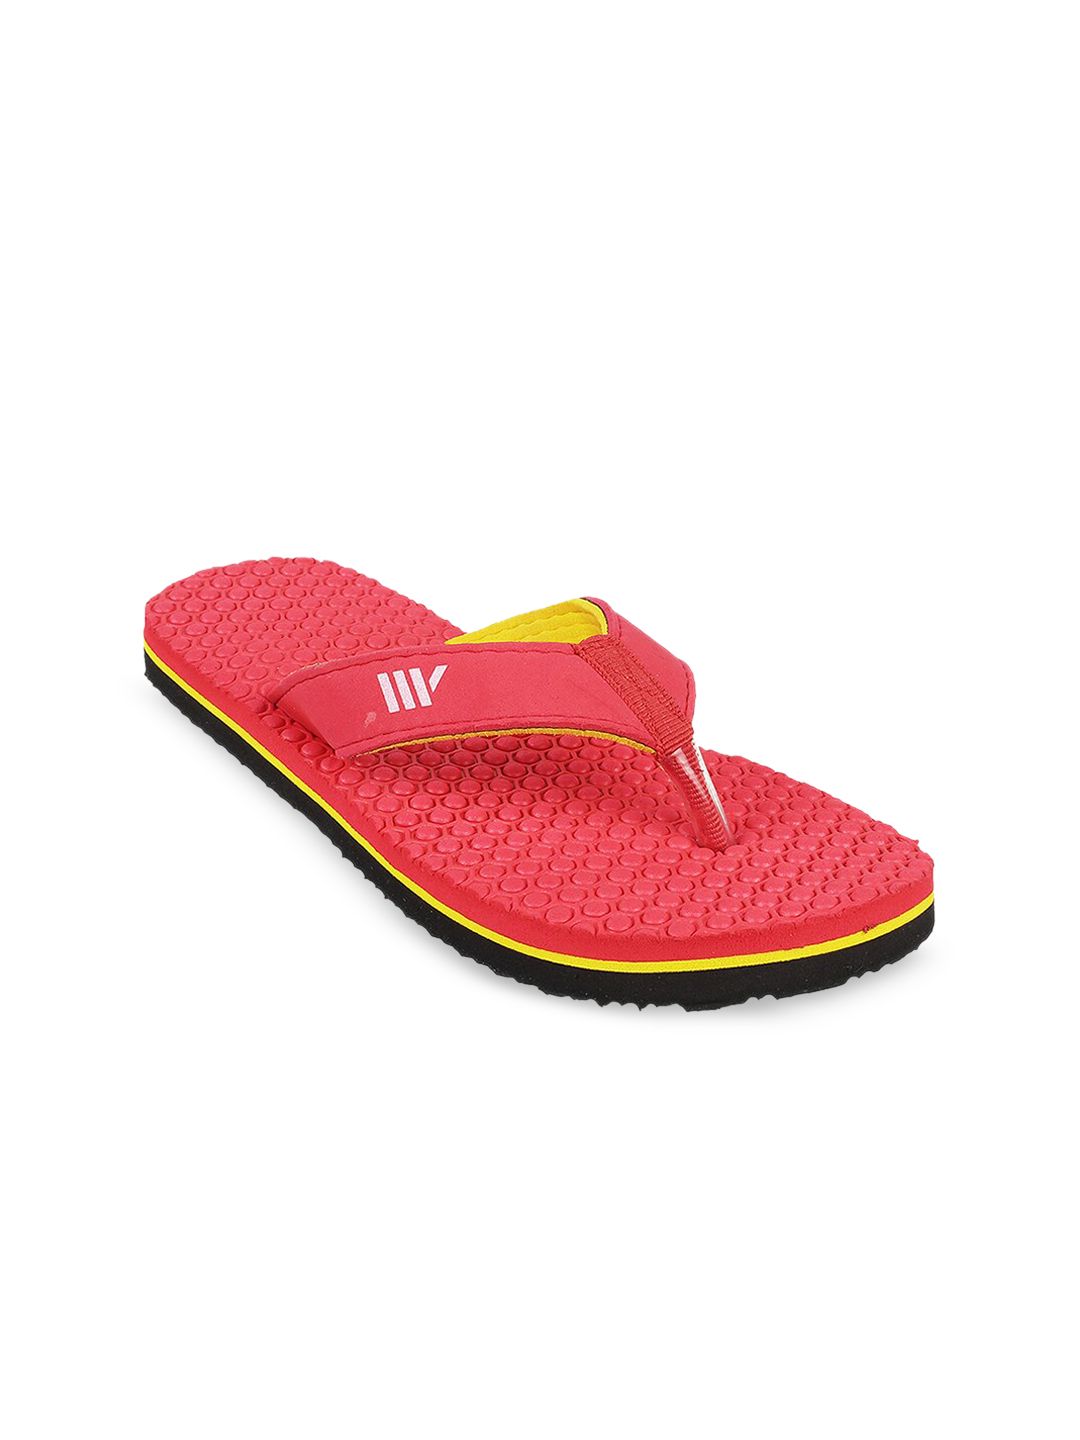 WALKWAY by Metro Women Red T-Strap Flats Price in India